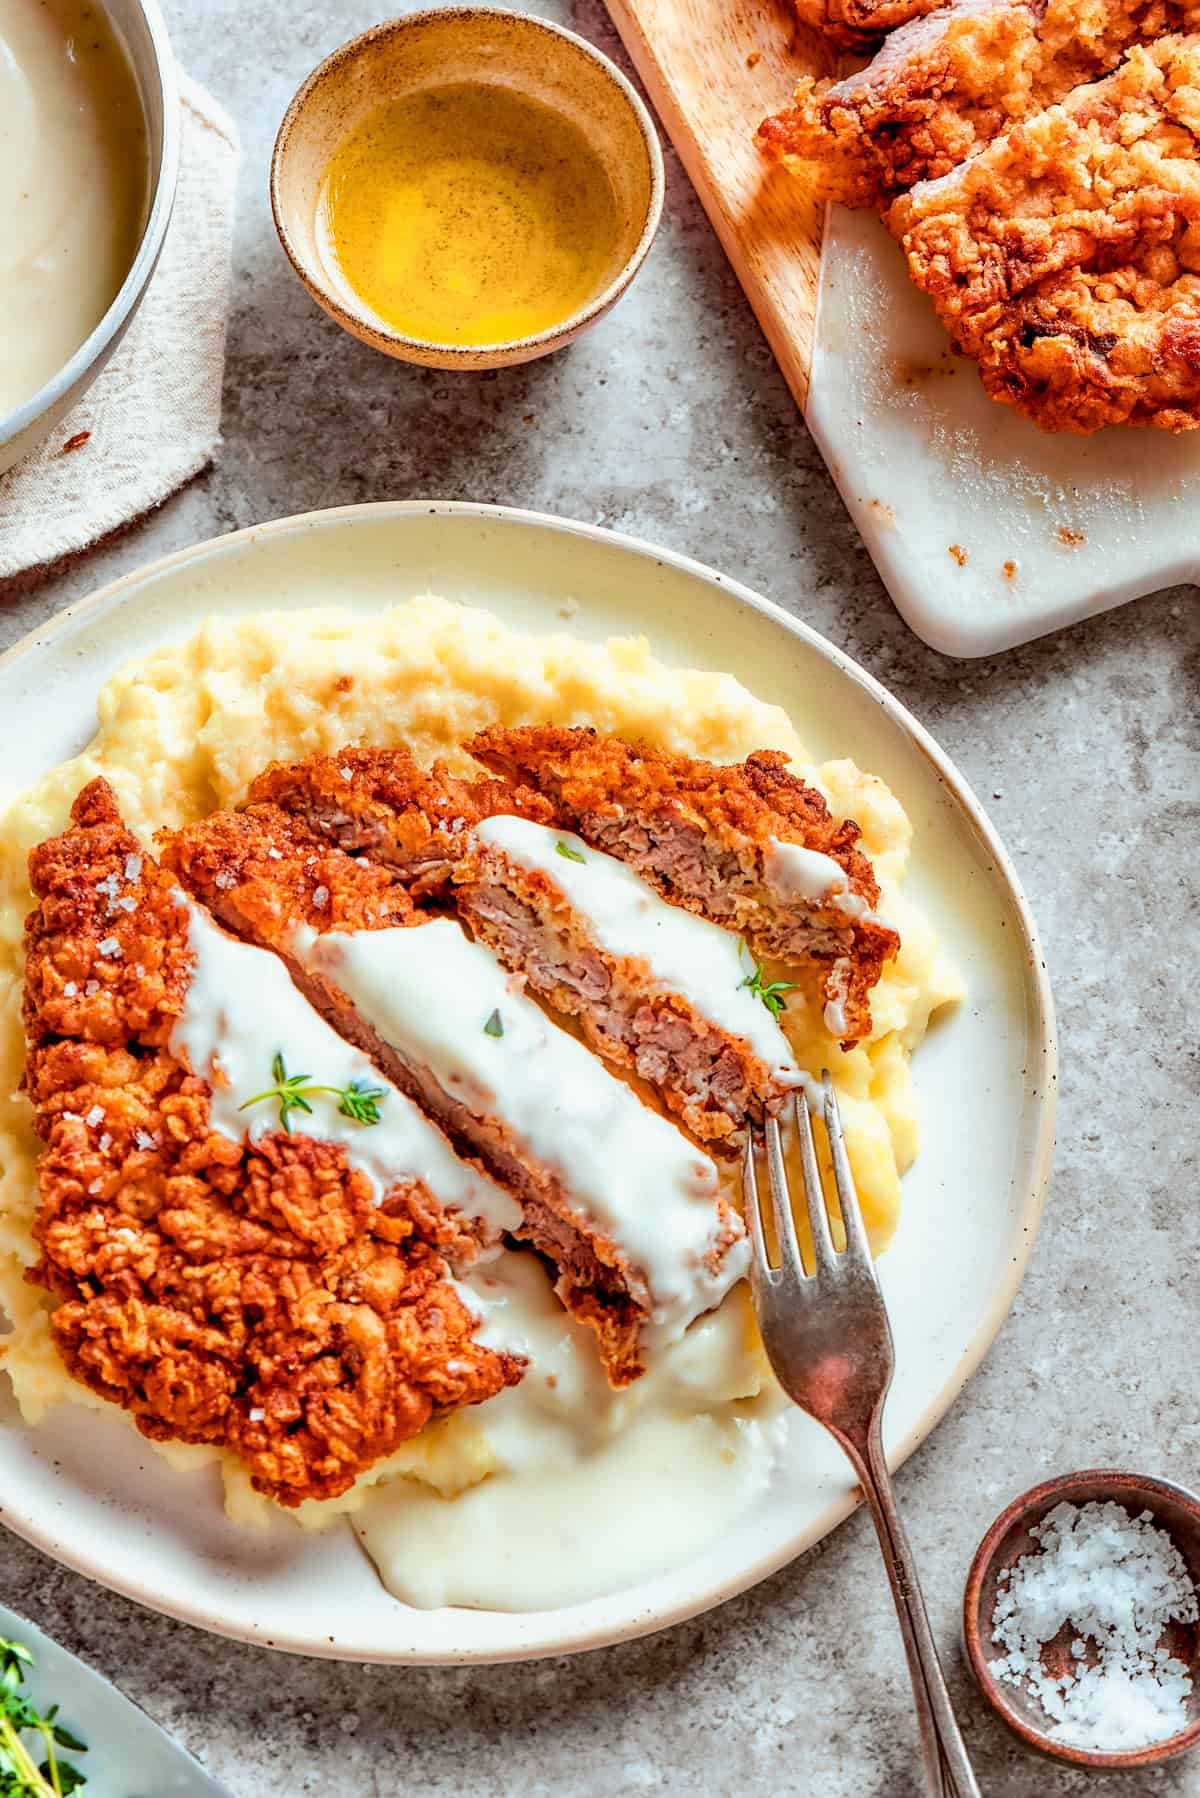 Sliced chicken fried steak served over mashed potatoes, and a fork is resting on top of the meat.